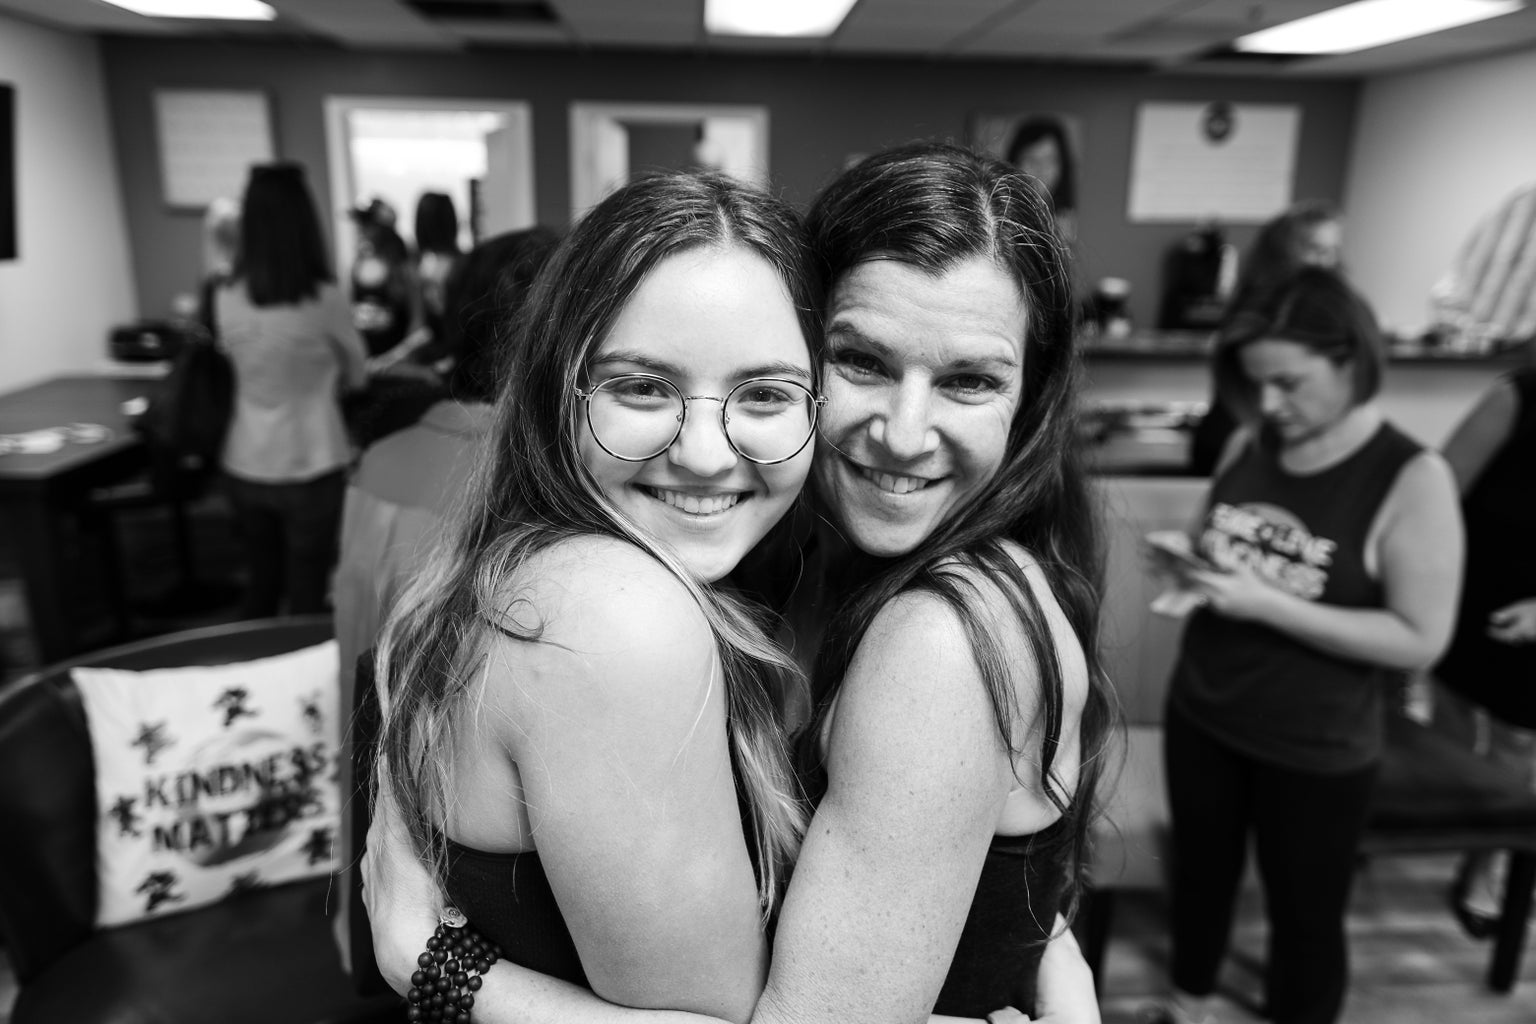 Laura Reiss and Megan Lee hugging at a Nourish Kindness event